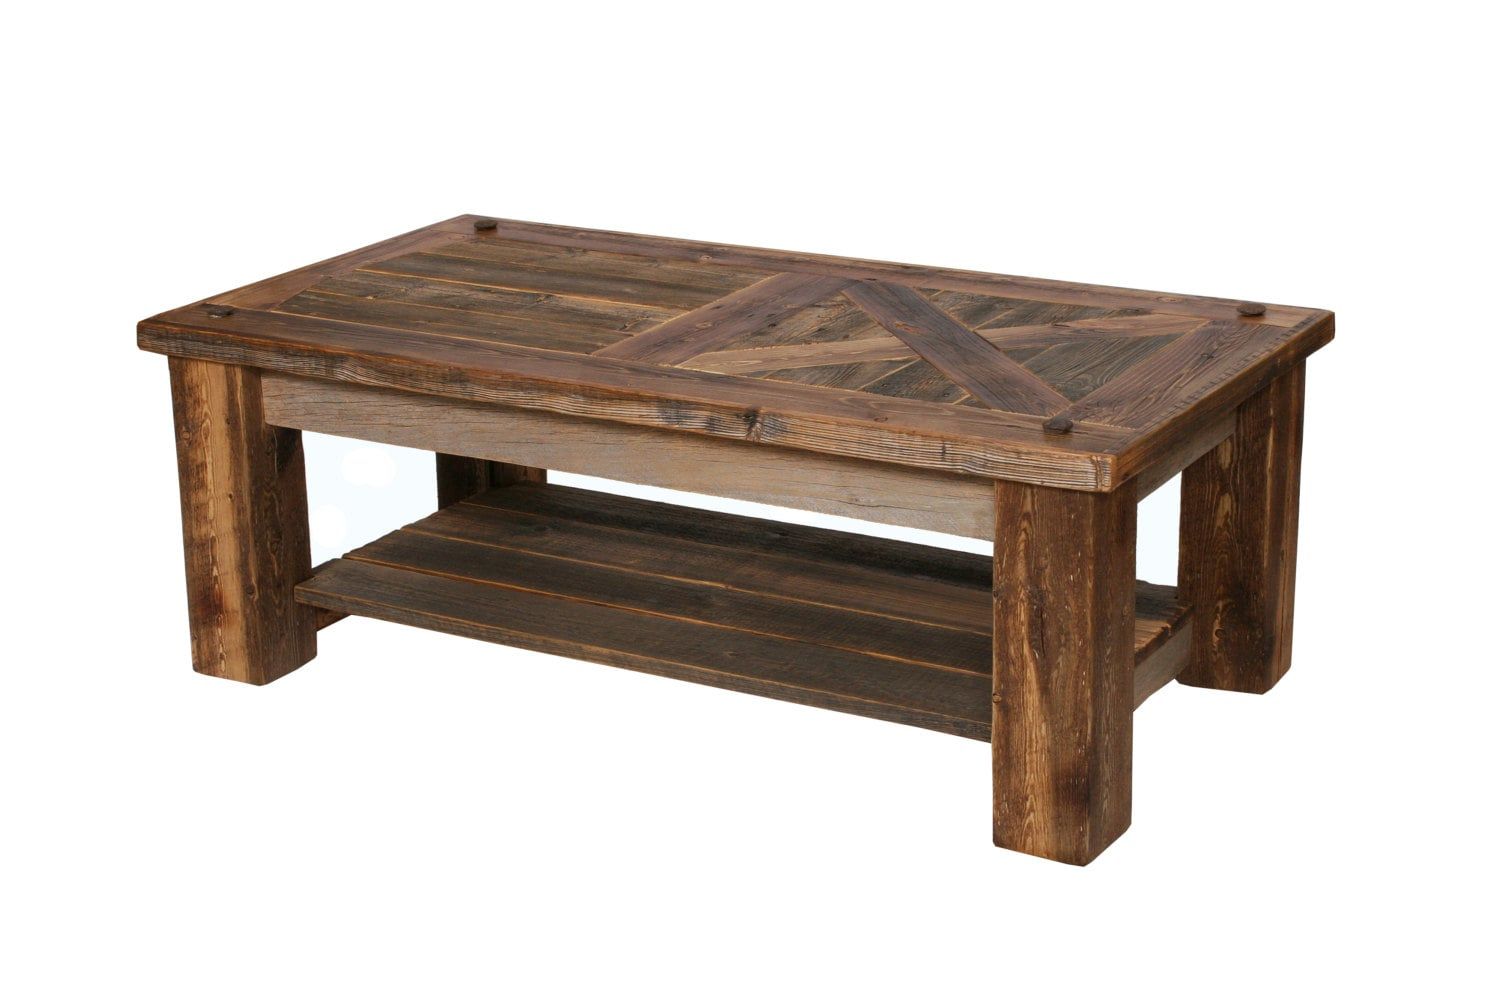 Barn Door Coffee Table Rustic Coffee Table Reclaimed Wood For Coffee Tables With Storage And Barn Doors (View 6 of 20)